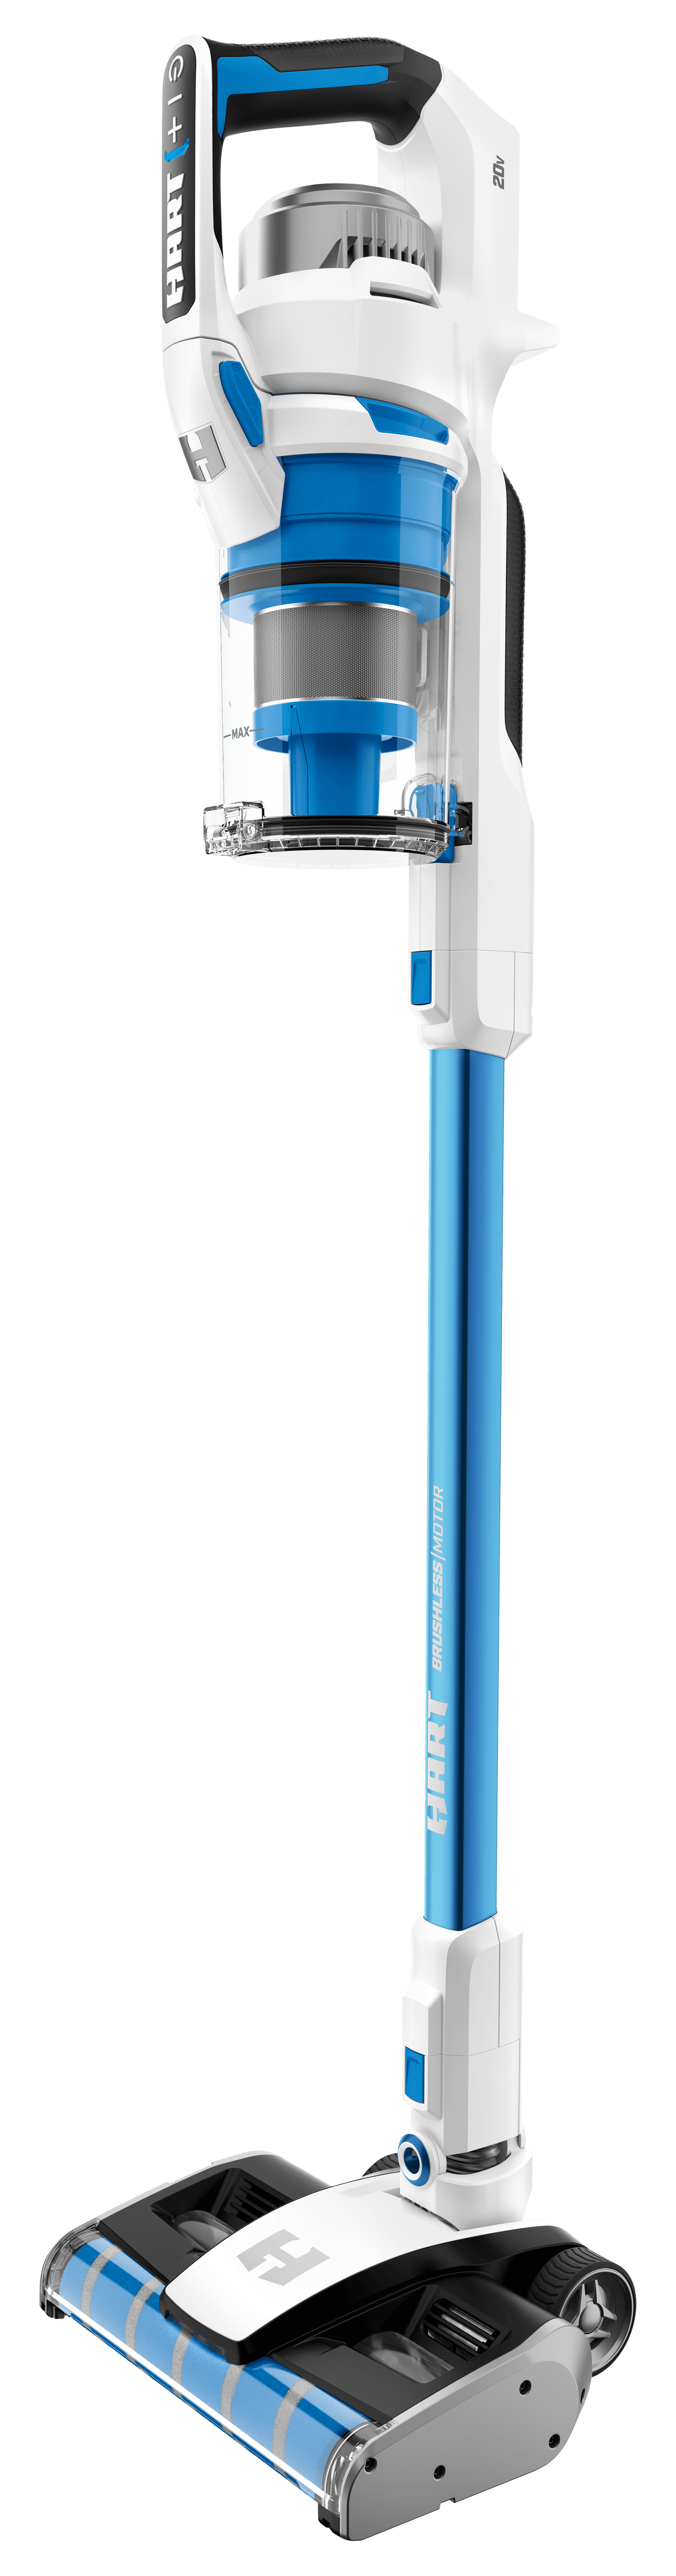 20V Cordless Stick Vacuum with Dual Brush Roll (Battery and Charger Not Included)